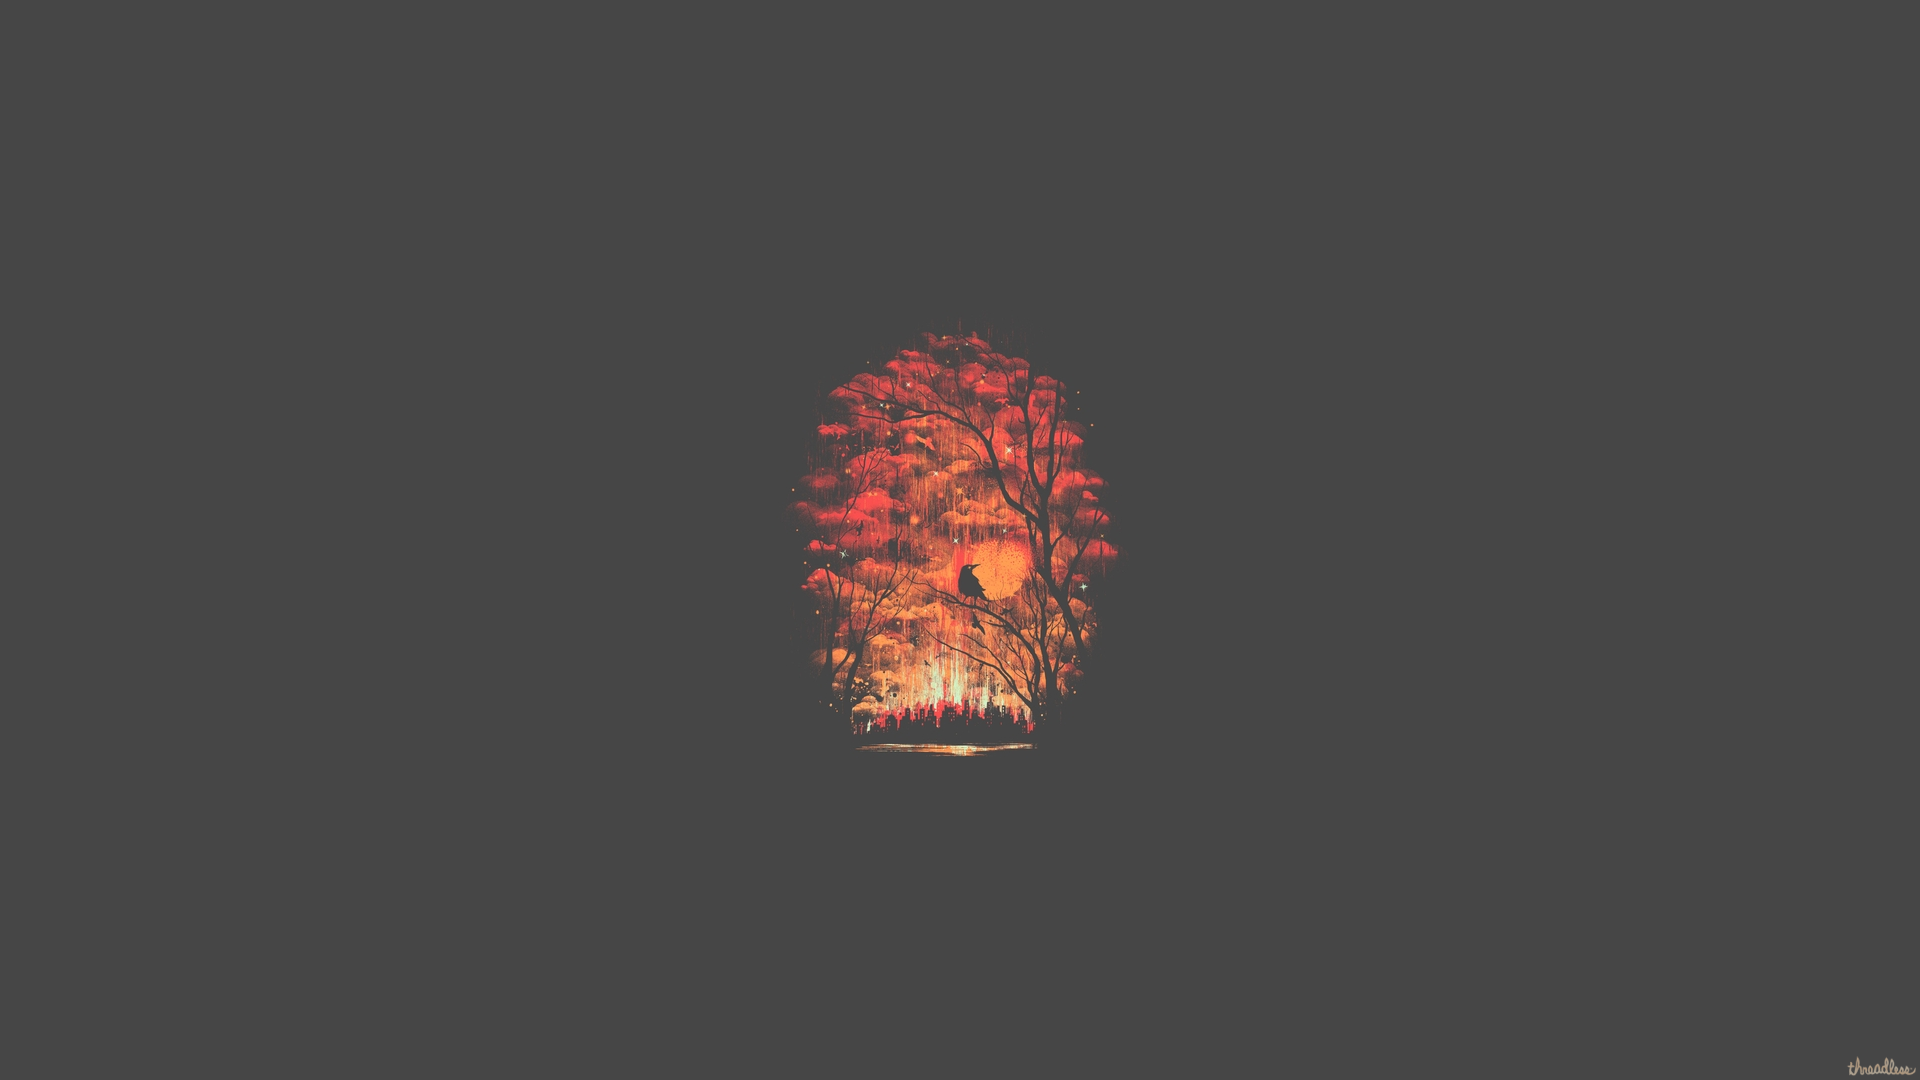 Forest Minimalist, HD Artist, 4k Wallpapers, Images, Backgrounds